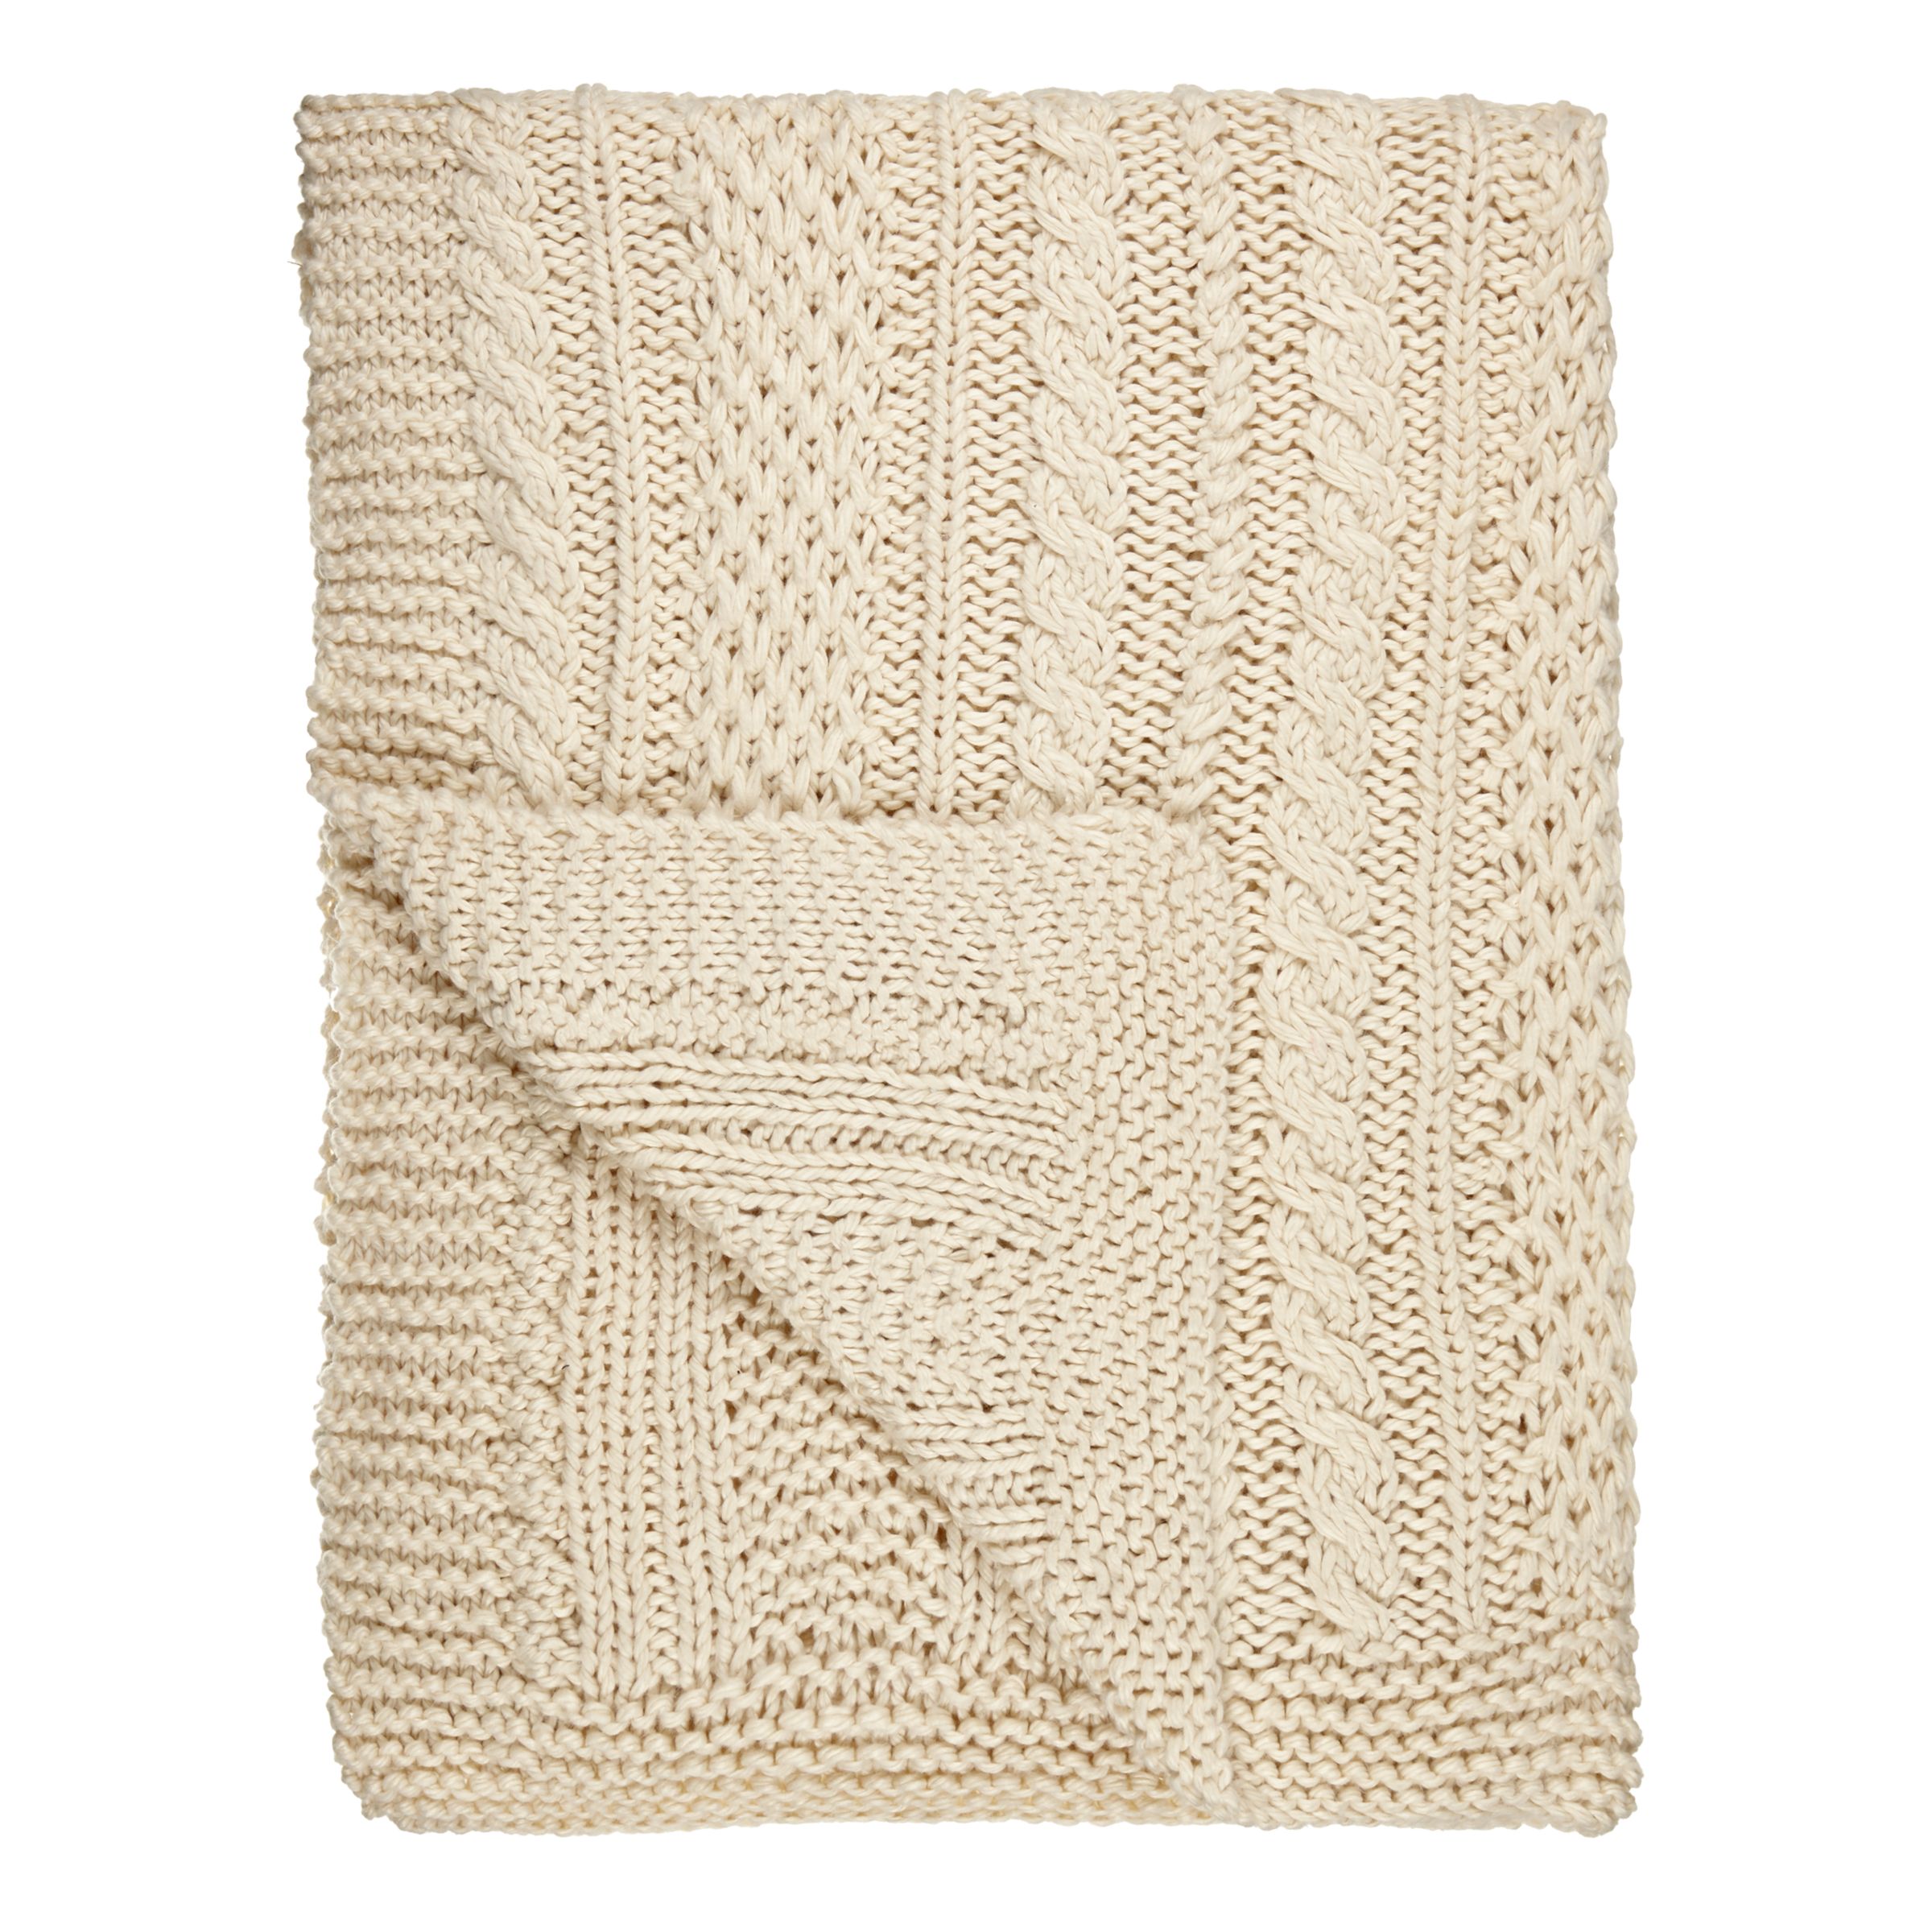 BuyJohn Lewis & Partners Chunky Knit Throw, Natural Online at johnlewis.com